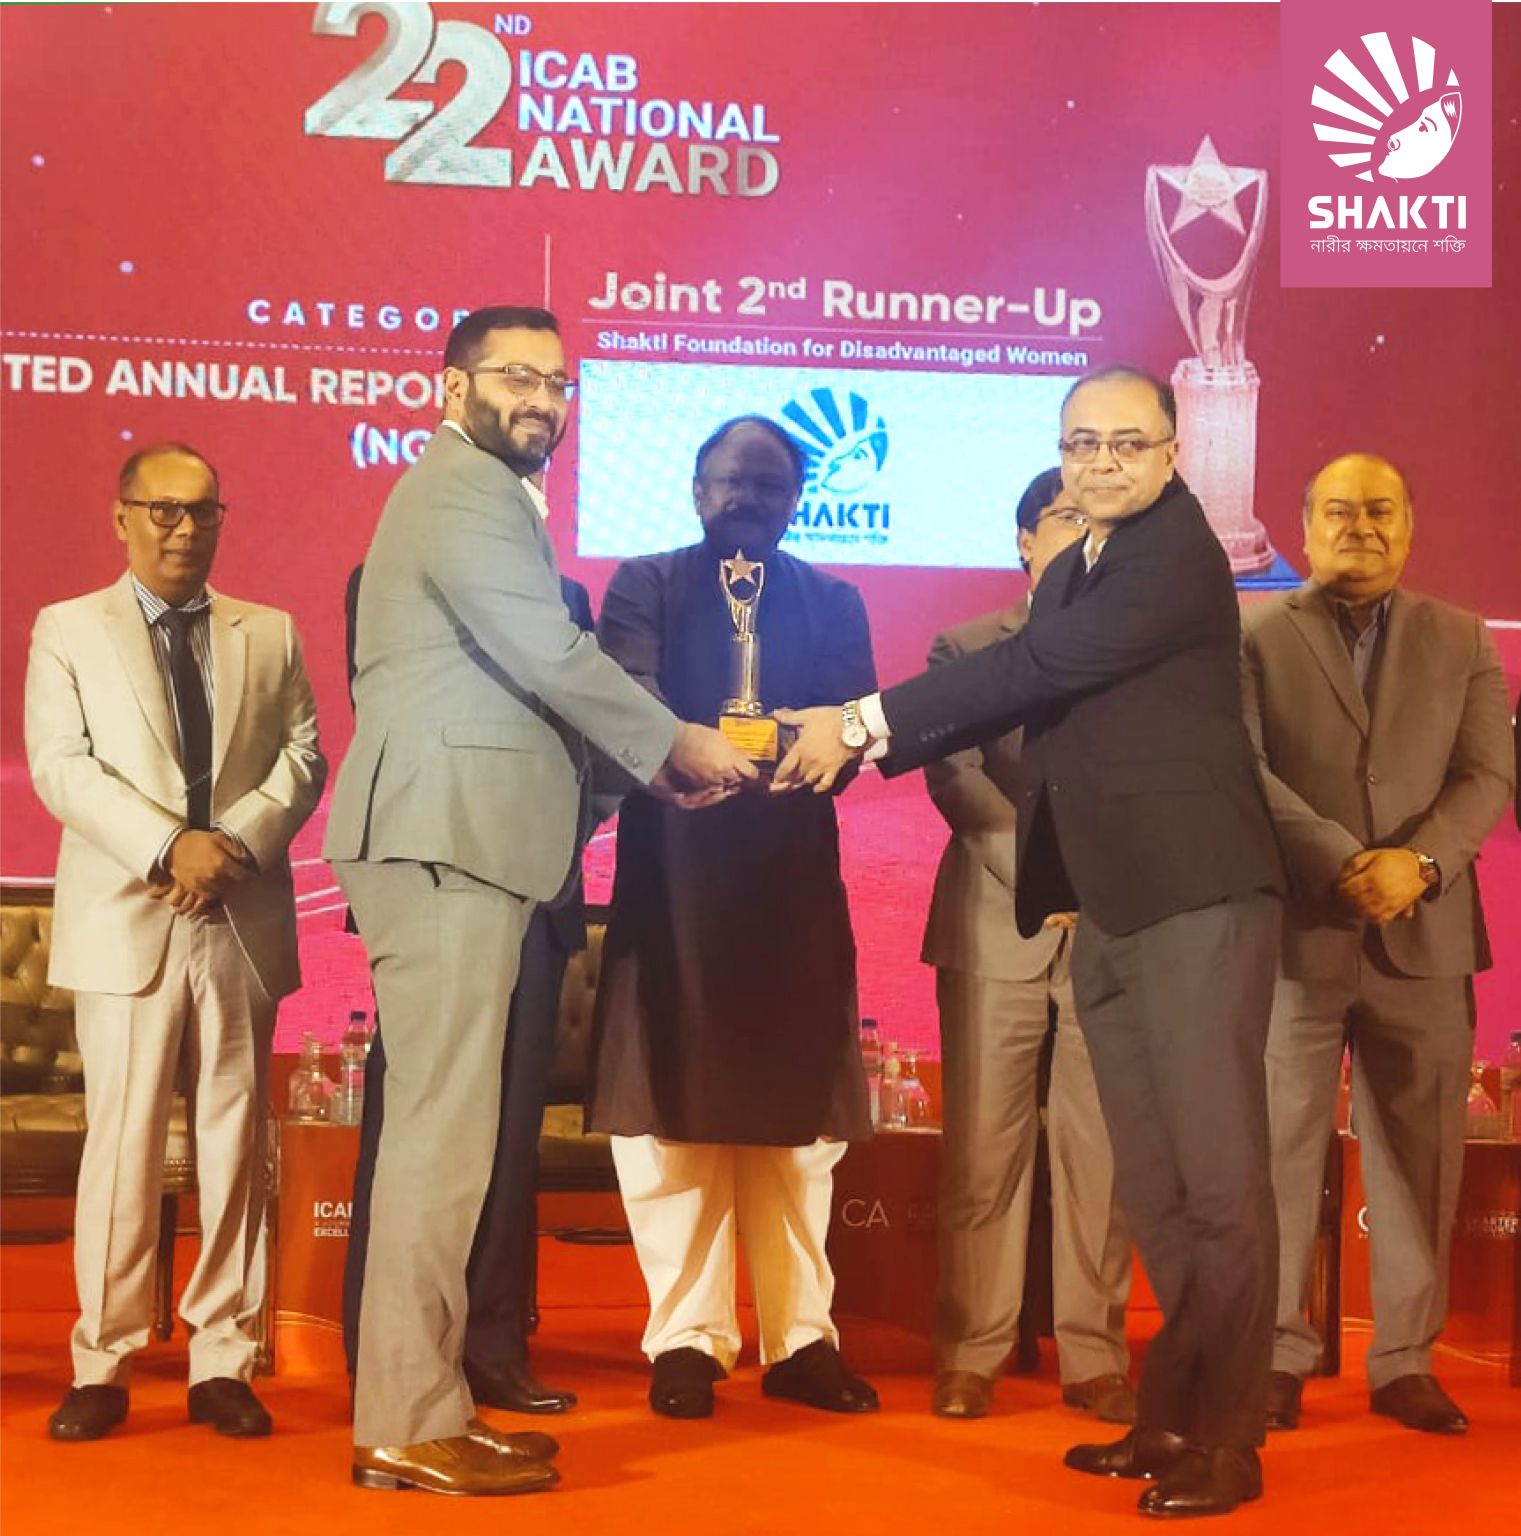 Shakti has bagged the 2nd runner-up position in the 22nd ICAB National Award